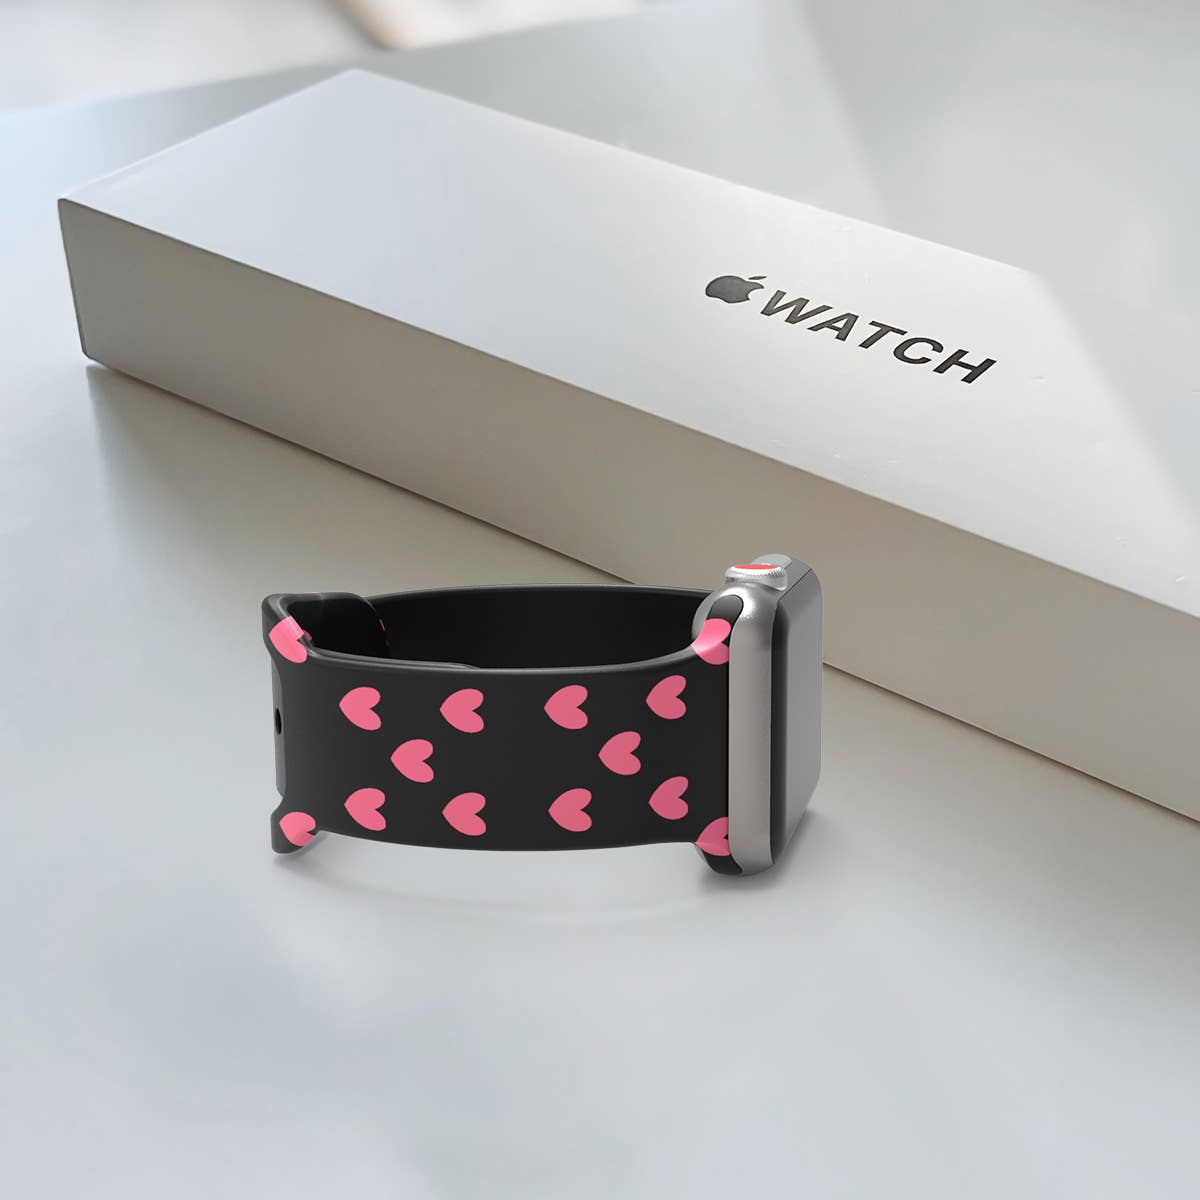 ShopTrendsNow - Valentine's Day Apple Watch Bands Hearts Love Kisses: 38/40/41mm / Mini Hearts